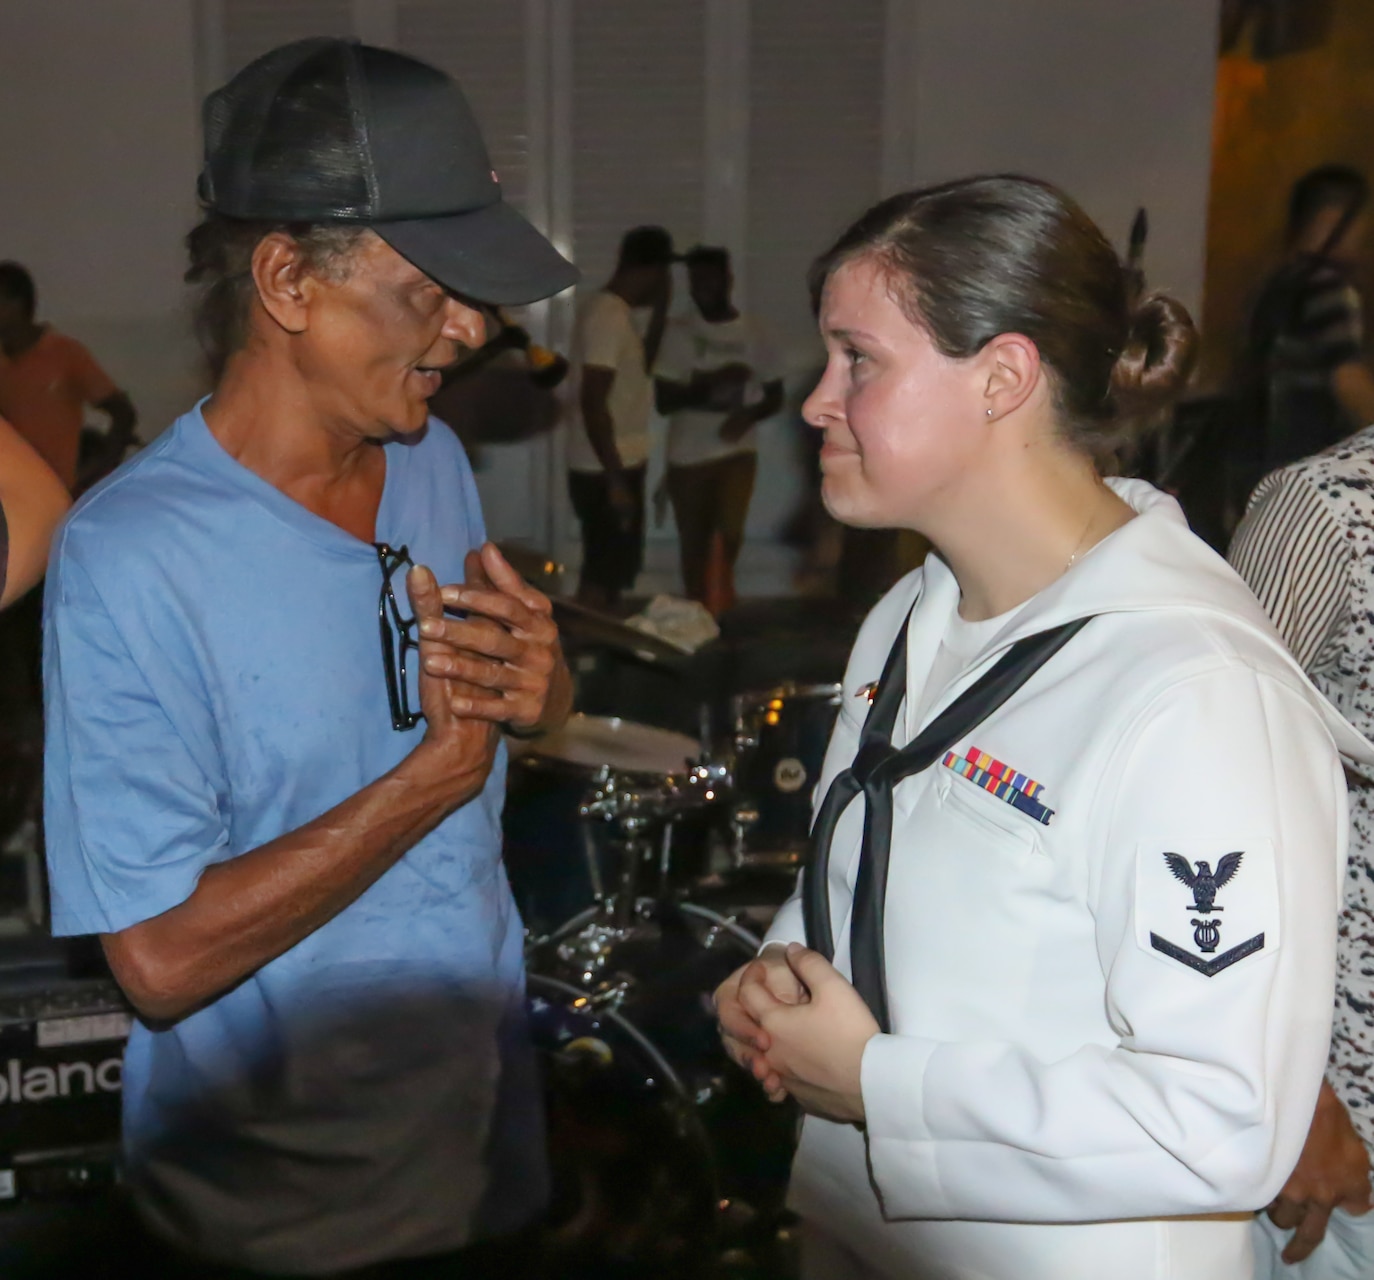 COLUMBO, Sri Lanka (Mar. 27, 2016) Musician 3rd Class Emily Kershaw, of the U.S. 7th Fleet Band, speaks with Senaka Batagoda, the artist who wrote the song “Api Kawuruda,” following Kershaw's performance of the song at Dutch Hospital in Columbo, Sri Lanka. The U.S. 7th Fleet conducts forward-deployed naval operations in support of U.S. national interests in the Indo-Asia-Pacific area of operations. (U.S. Navy photo by Chief Mass Communication Specialist Hendrick Simoes/Released)